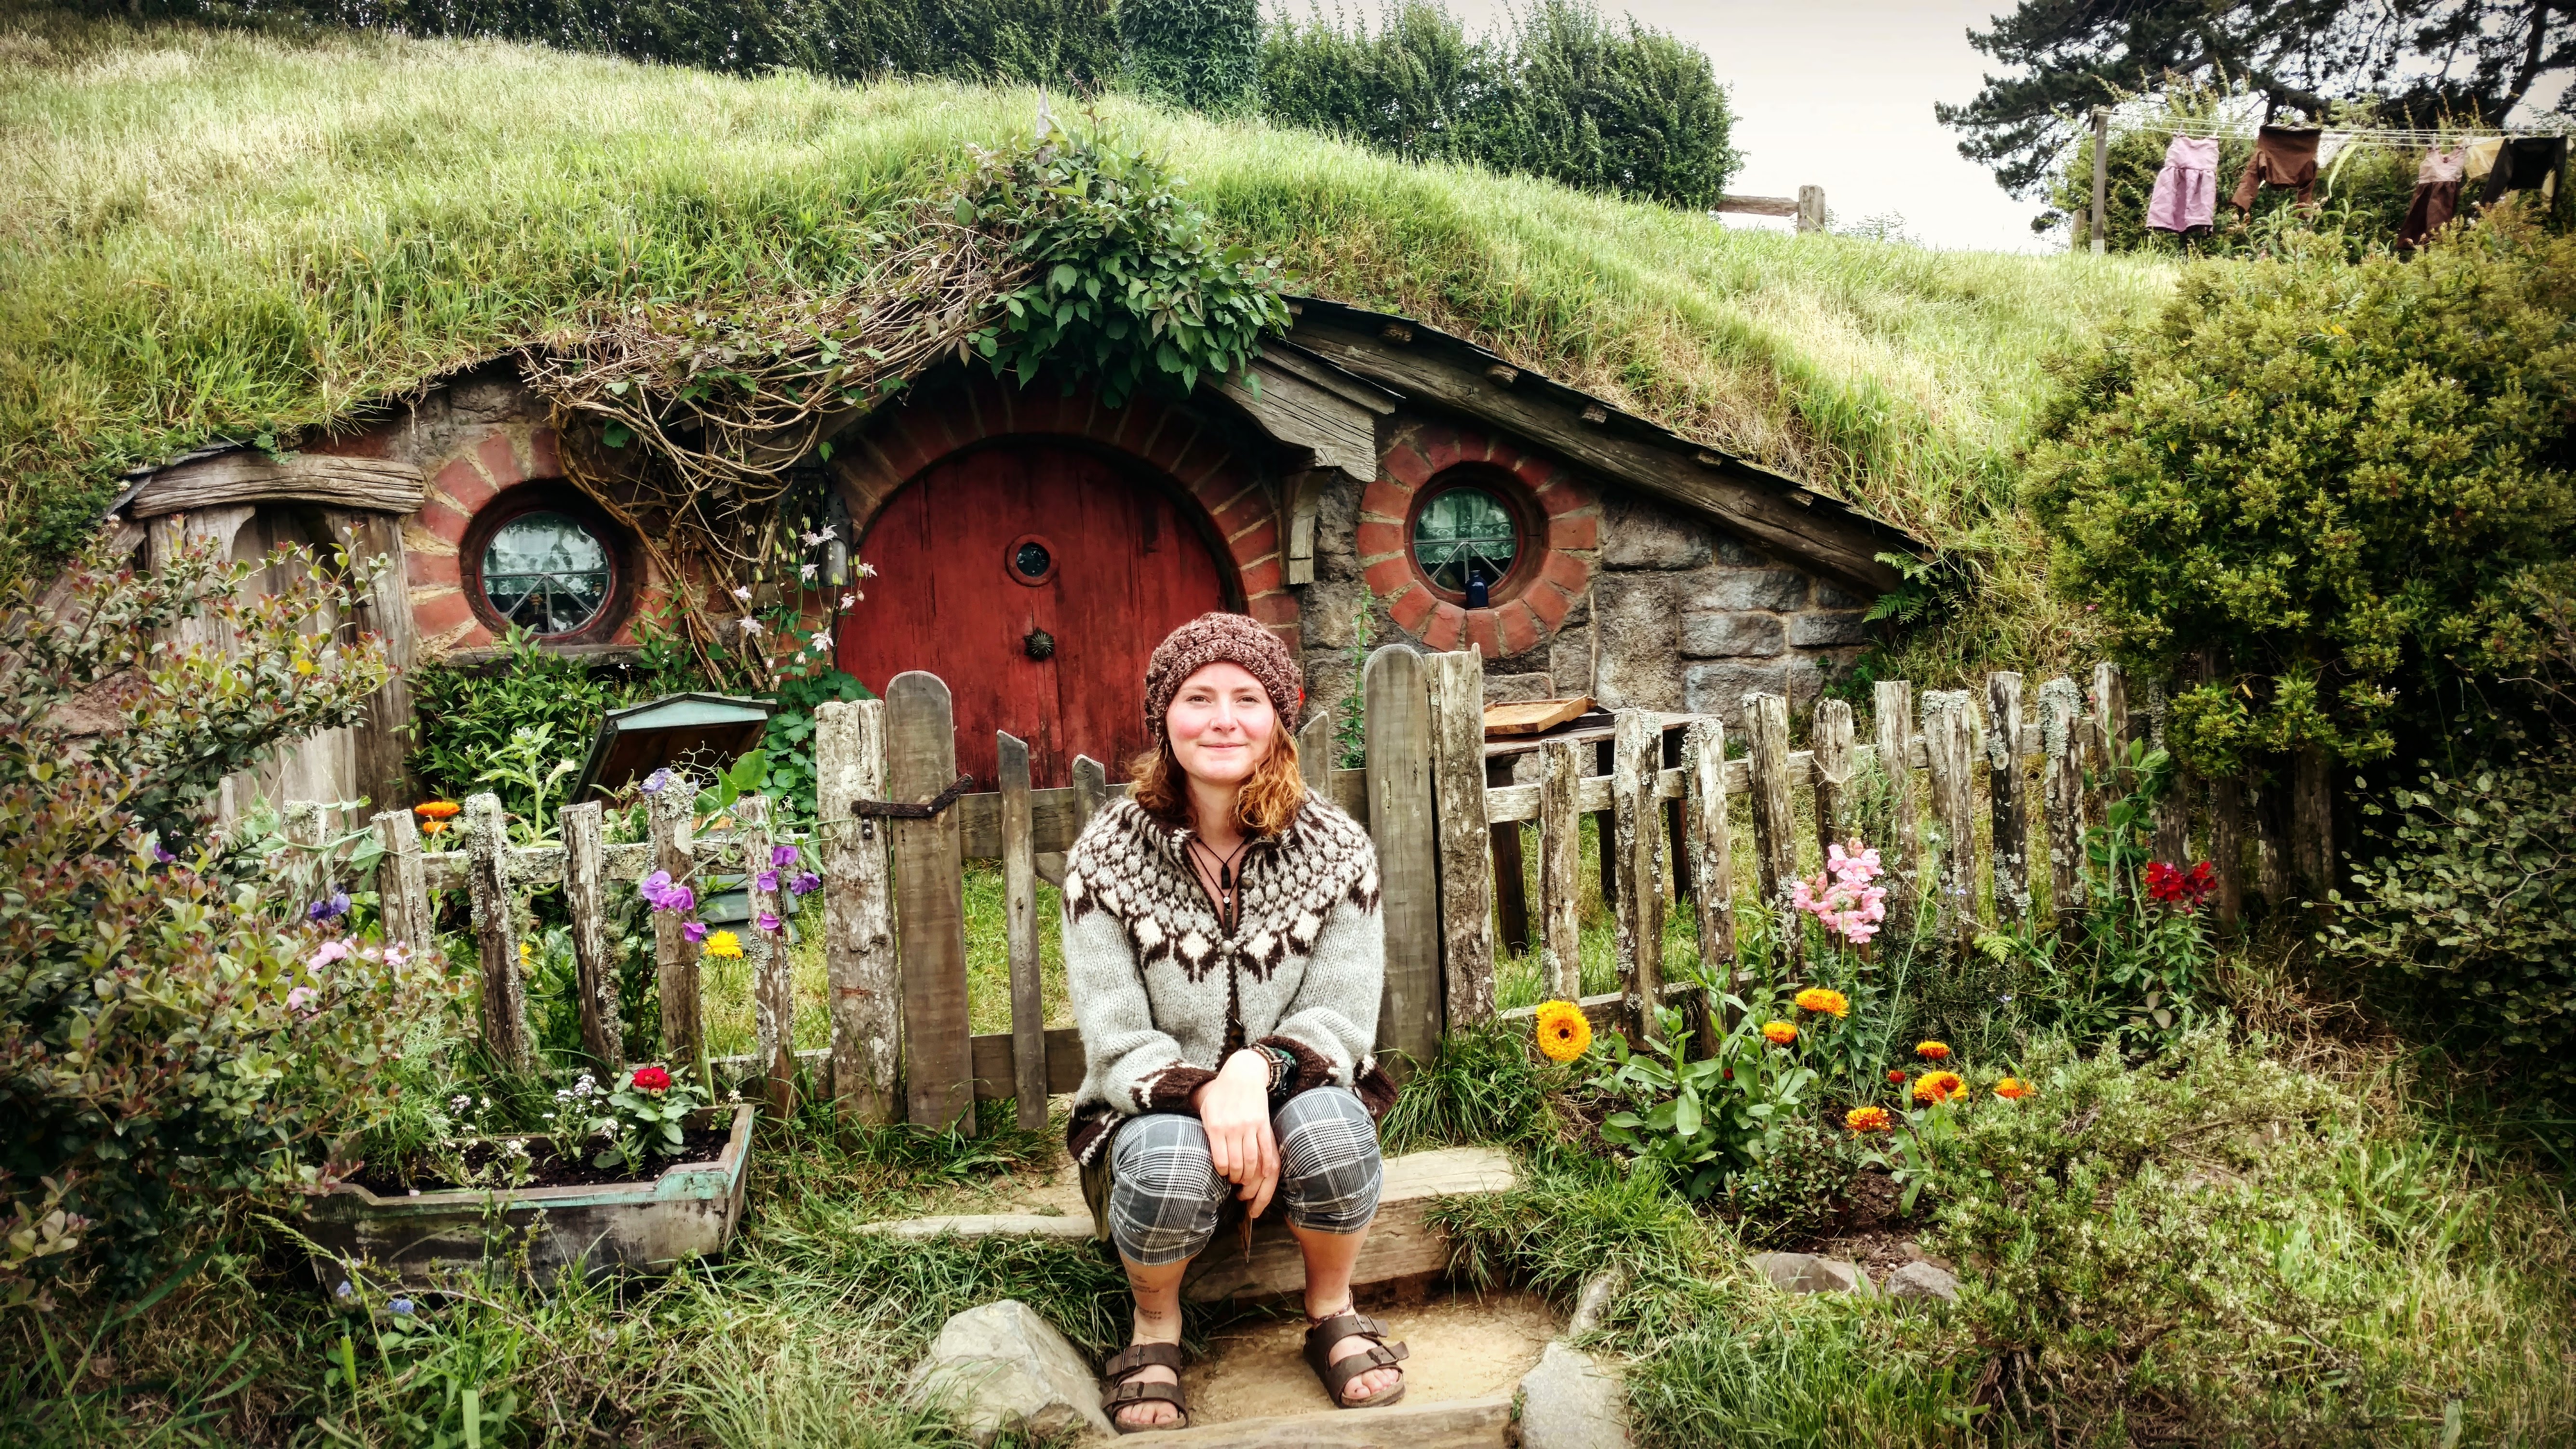 Photo of Nissa outside the hobbit hole in the Shire in NZ